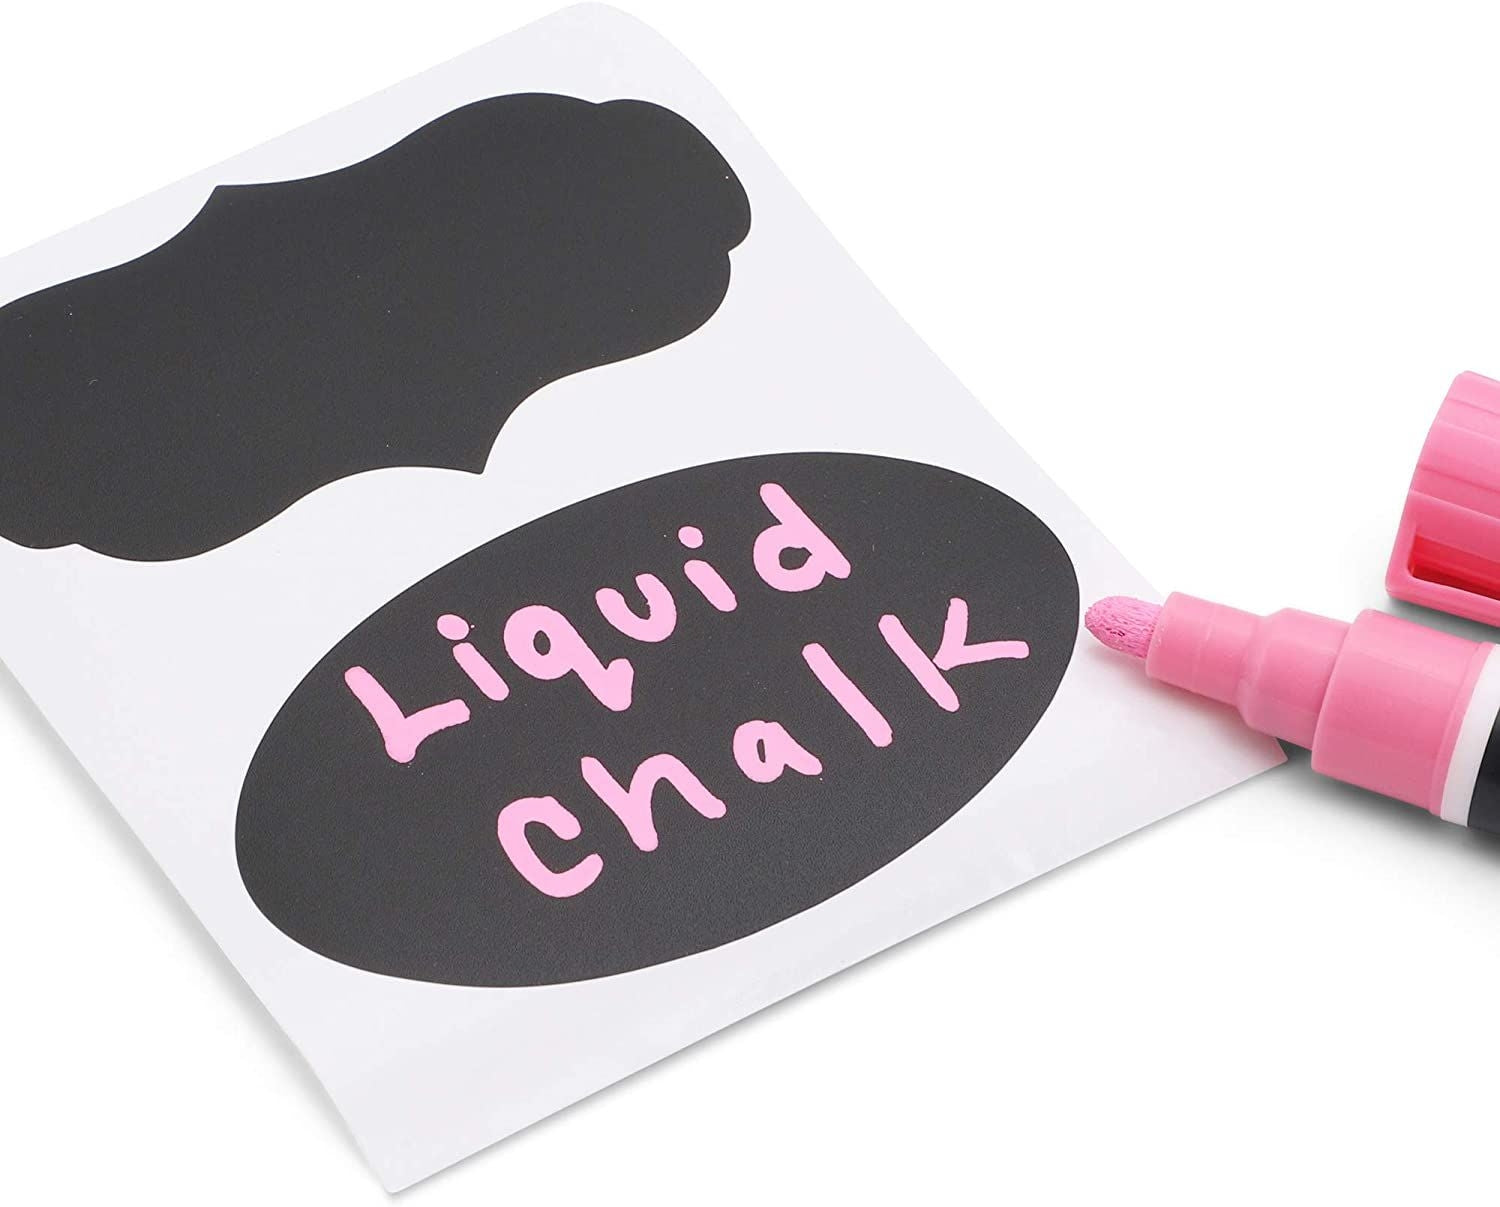 Chalk Board Markers with Replaceable Tips